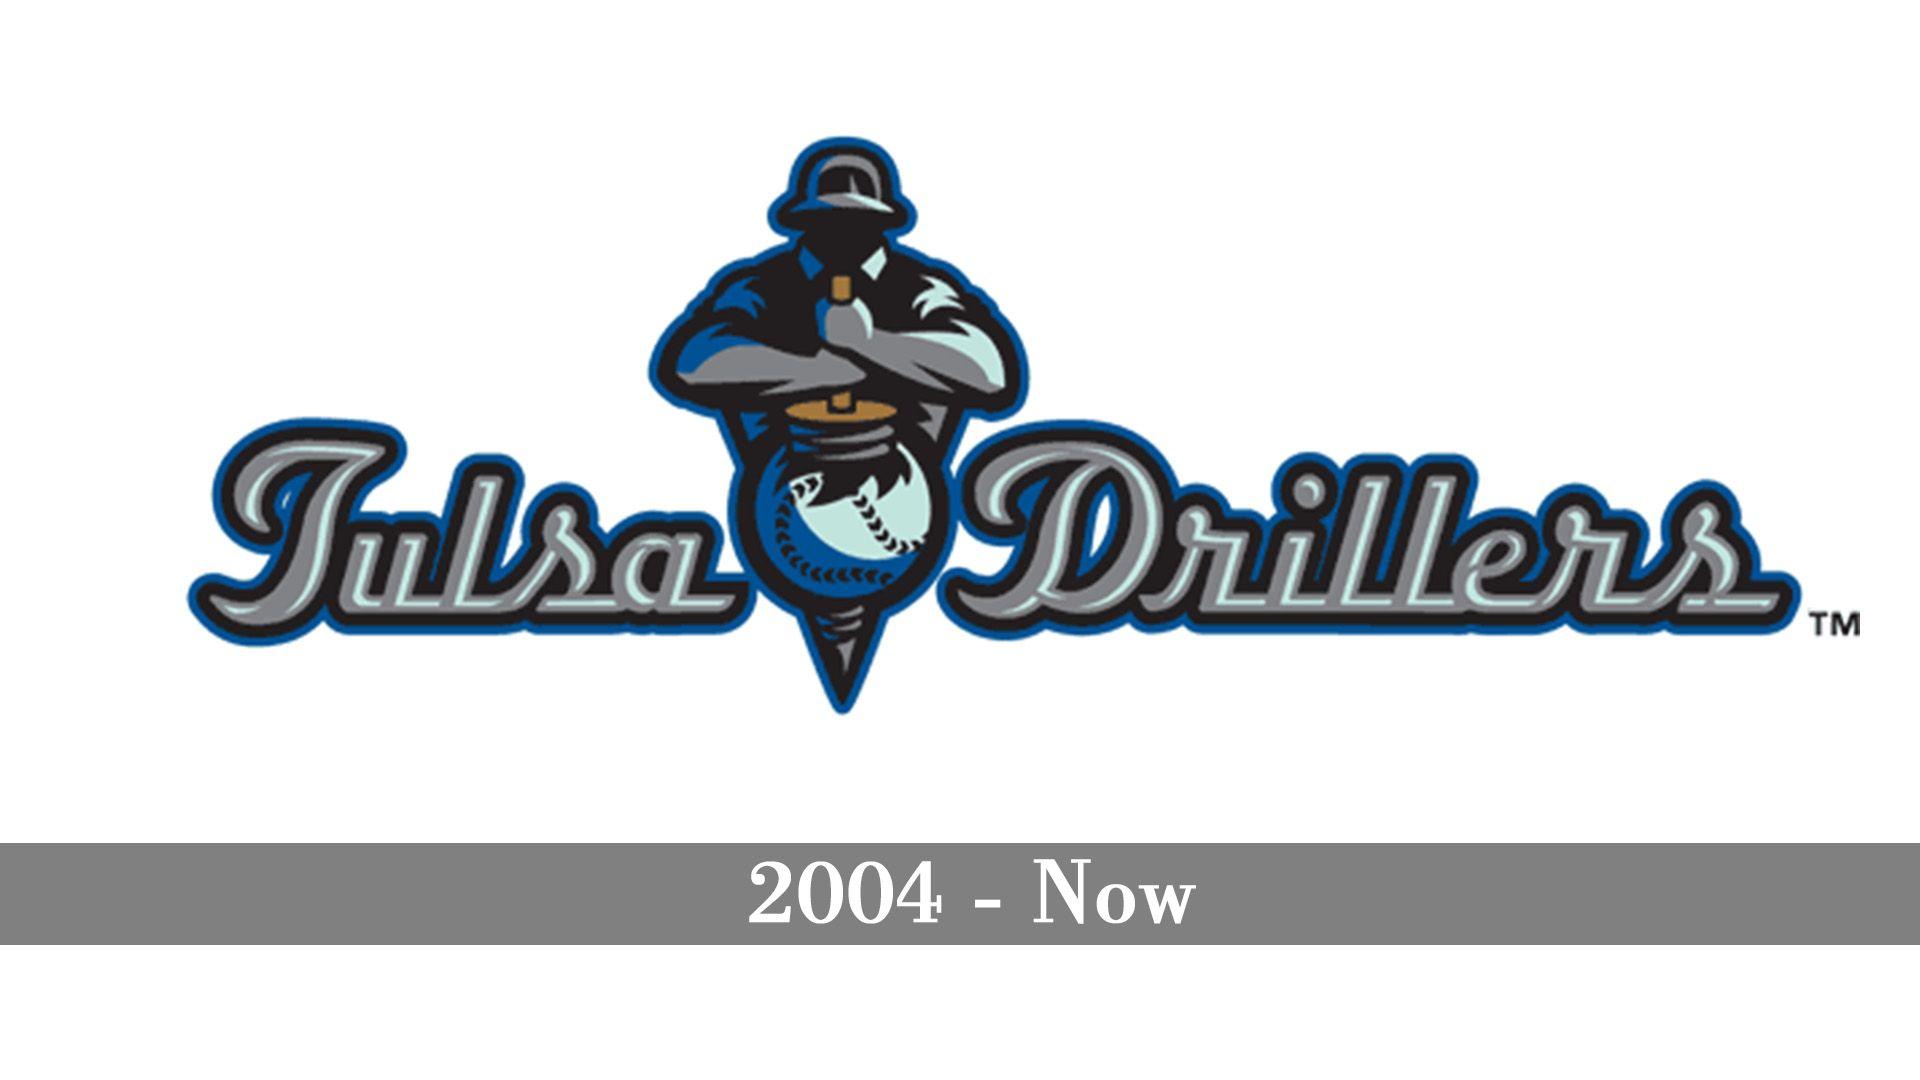 Drillers Logo - Tulsa Drillers logo, Tulsa Drillers Symbol, Meaning, History and ...